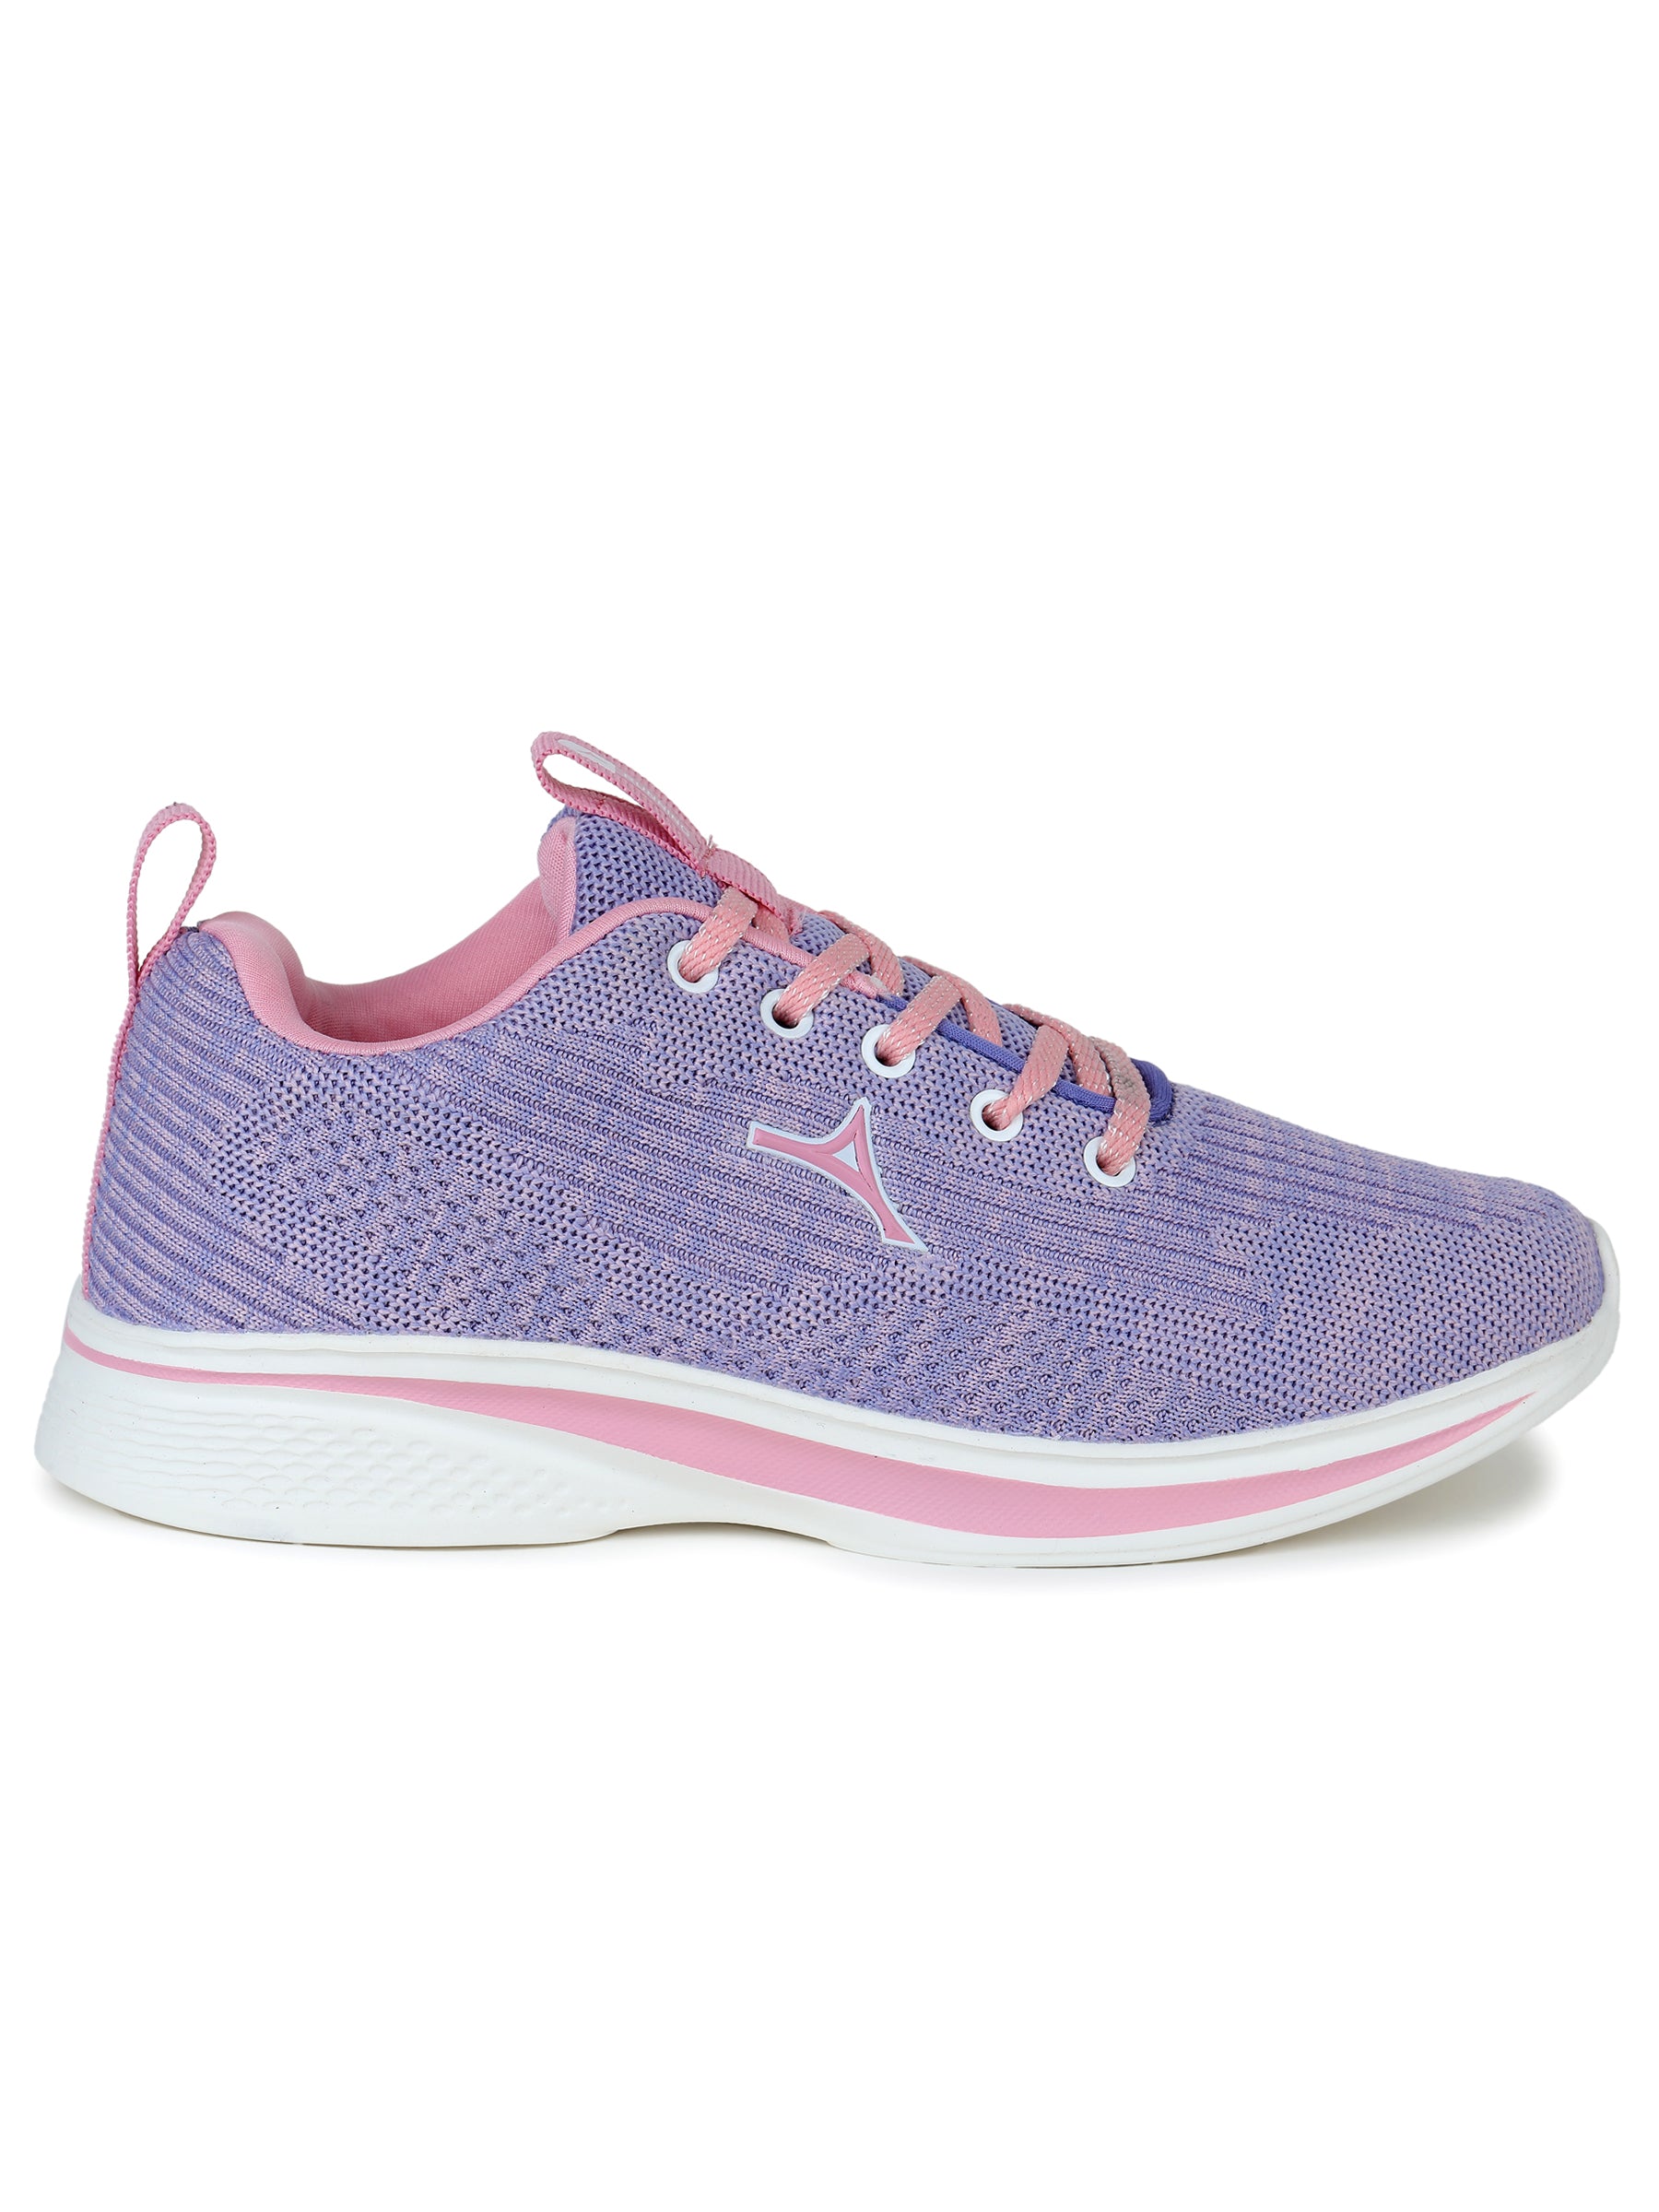 FREESIA SPORTS SHOES FOR WOMEN